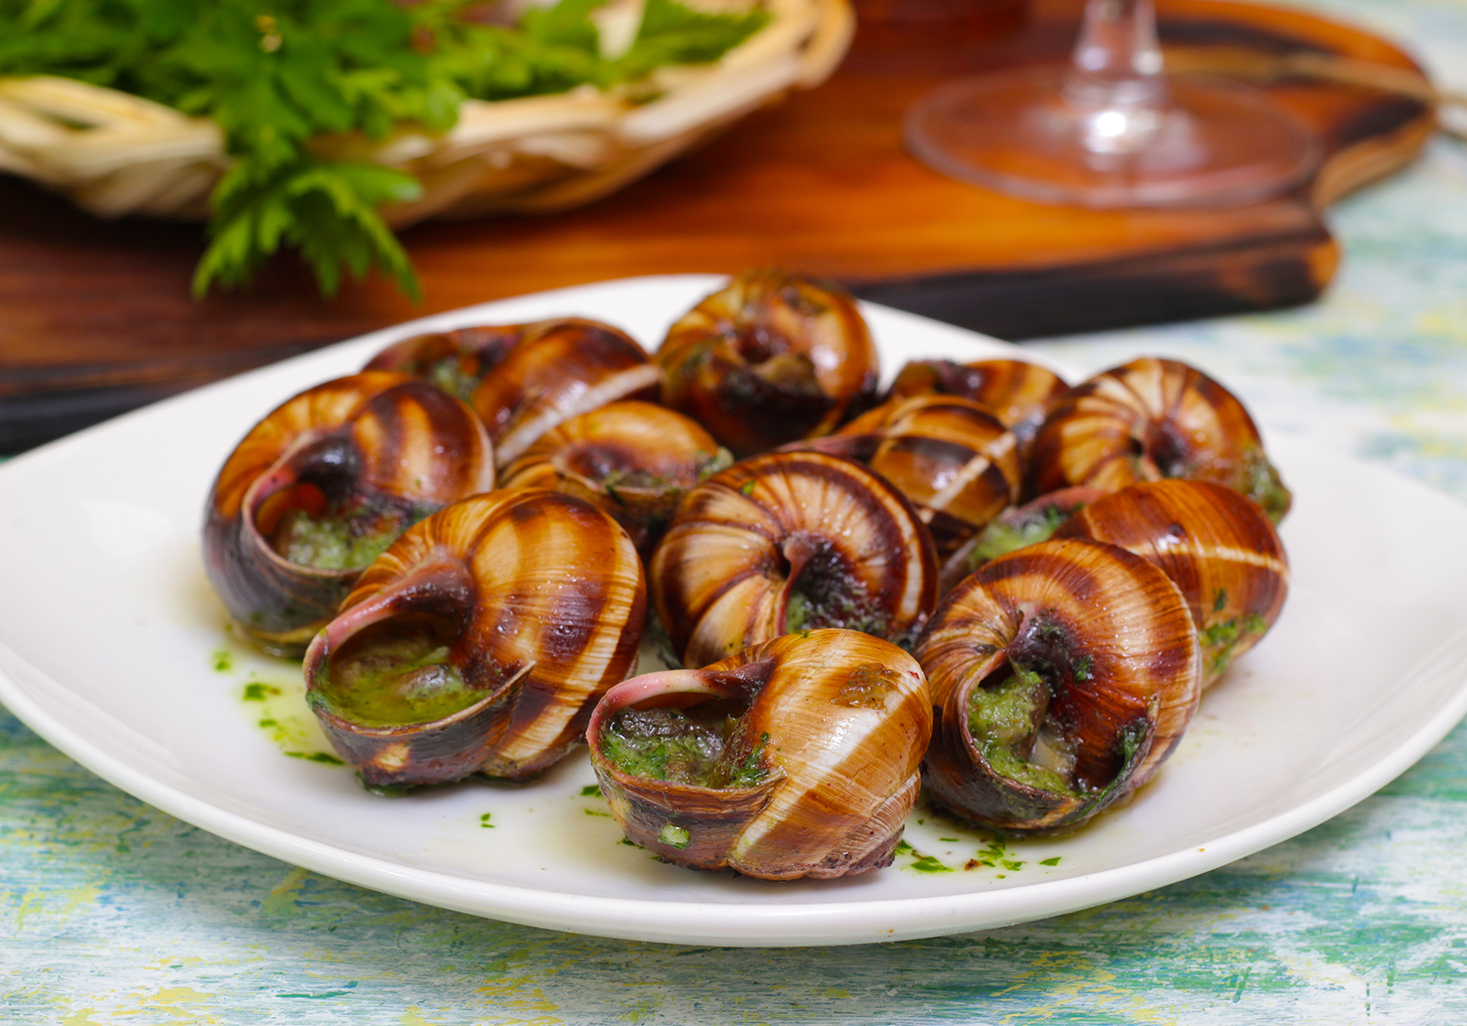 Escargots Bourguignonne  Traditional Snail Dish From Burgundy, France